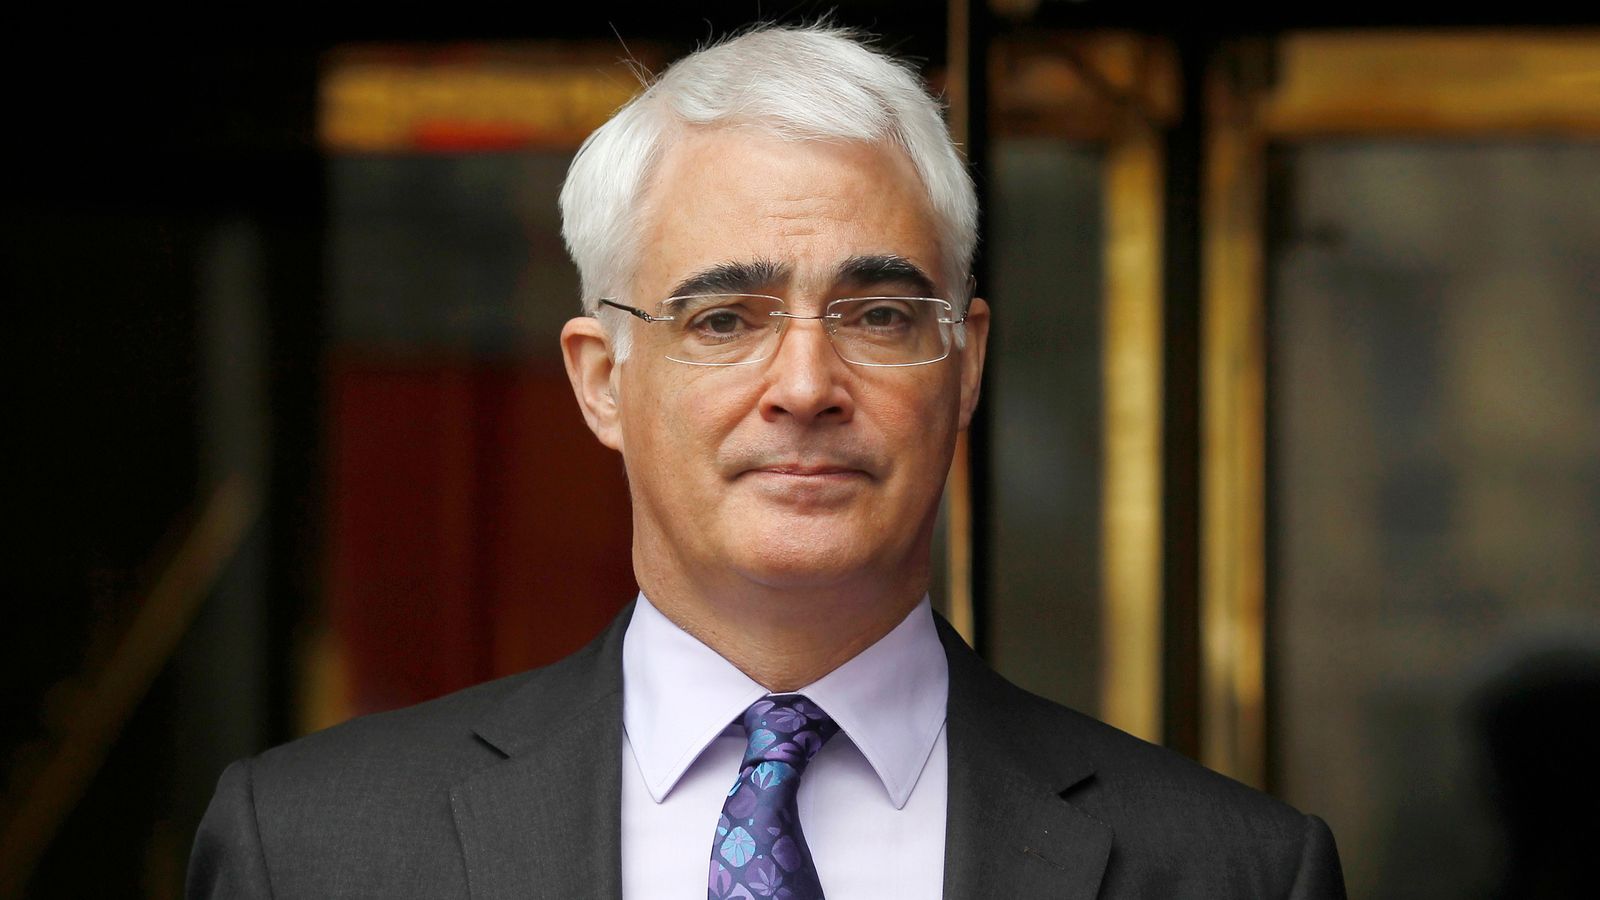 Former Labour chancellor Alistair Darling dies